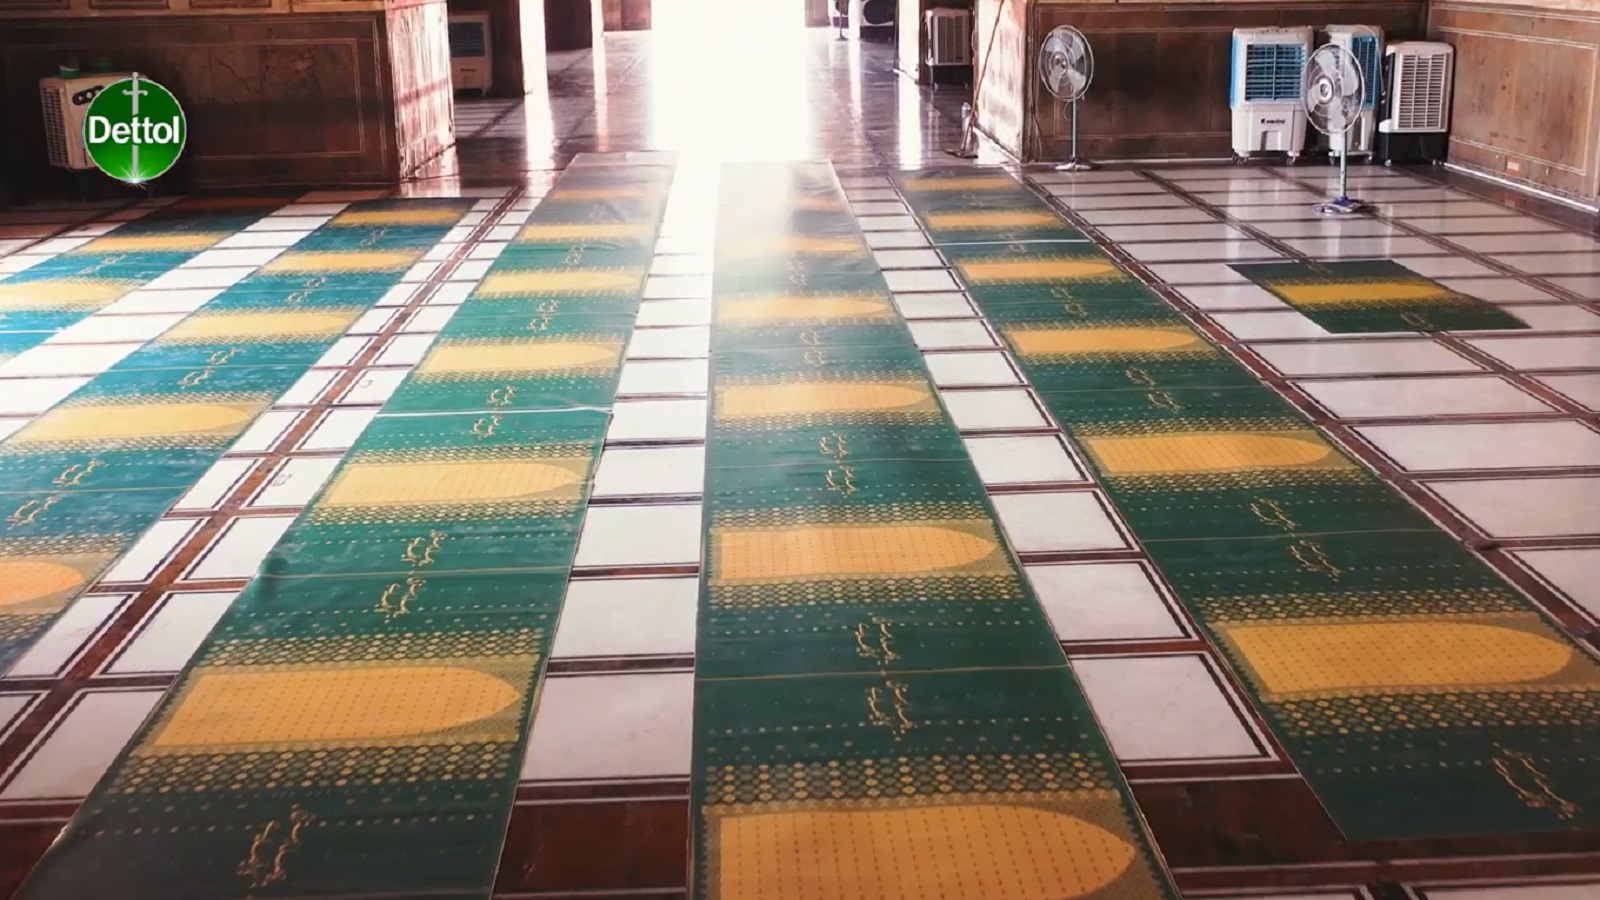 #TBT: Dettol Promotes Social Distancing in Mosques with a Specially Designed Prayer Mat